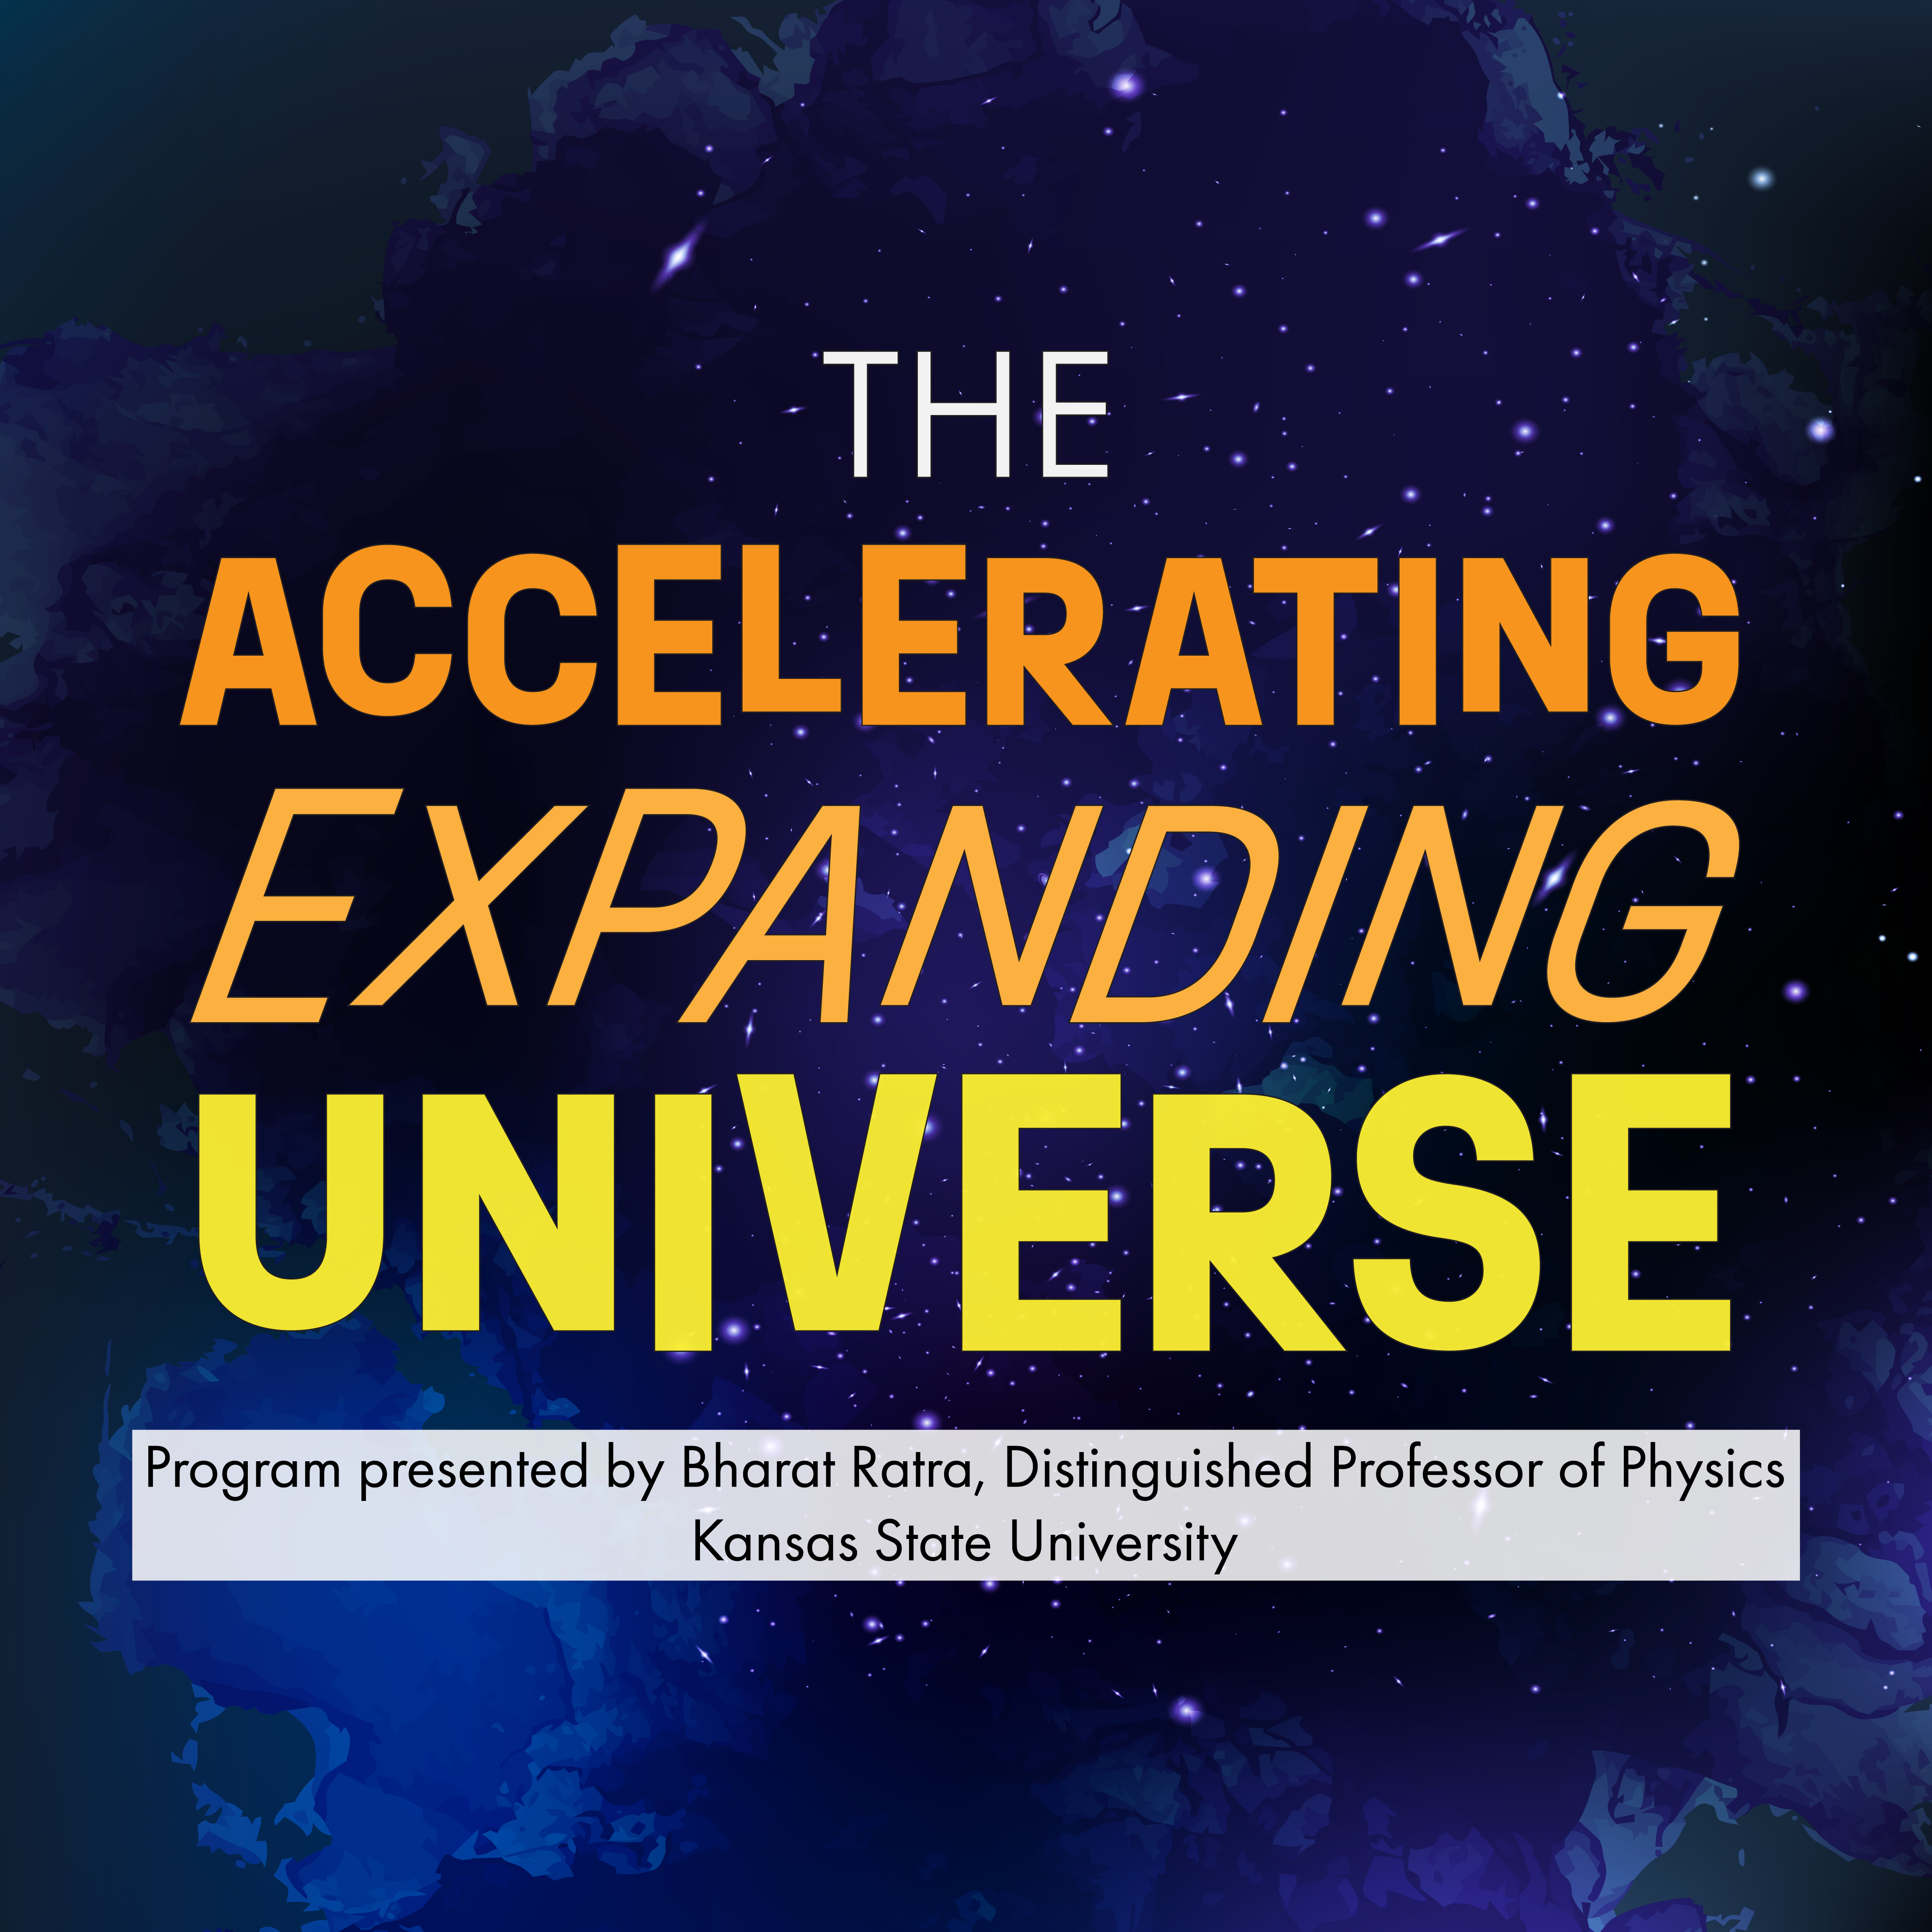 The Accelerating Expanding Universe